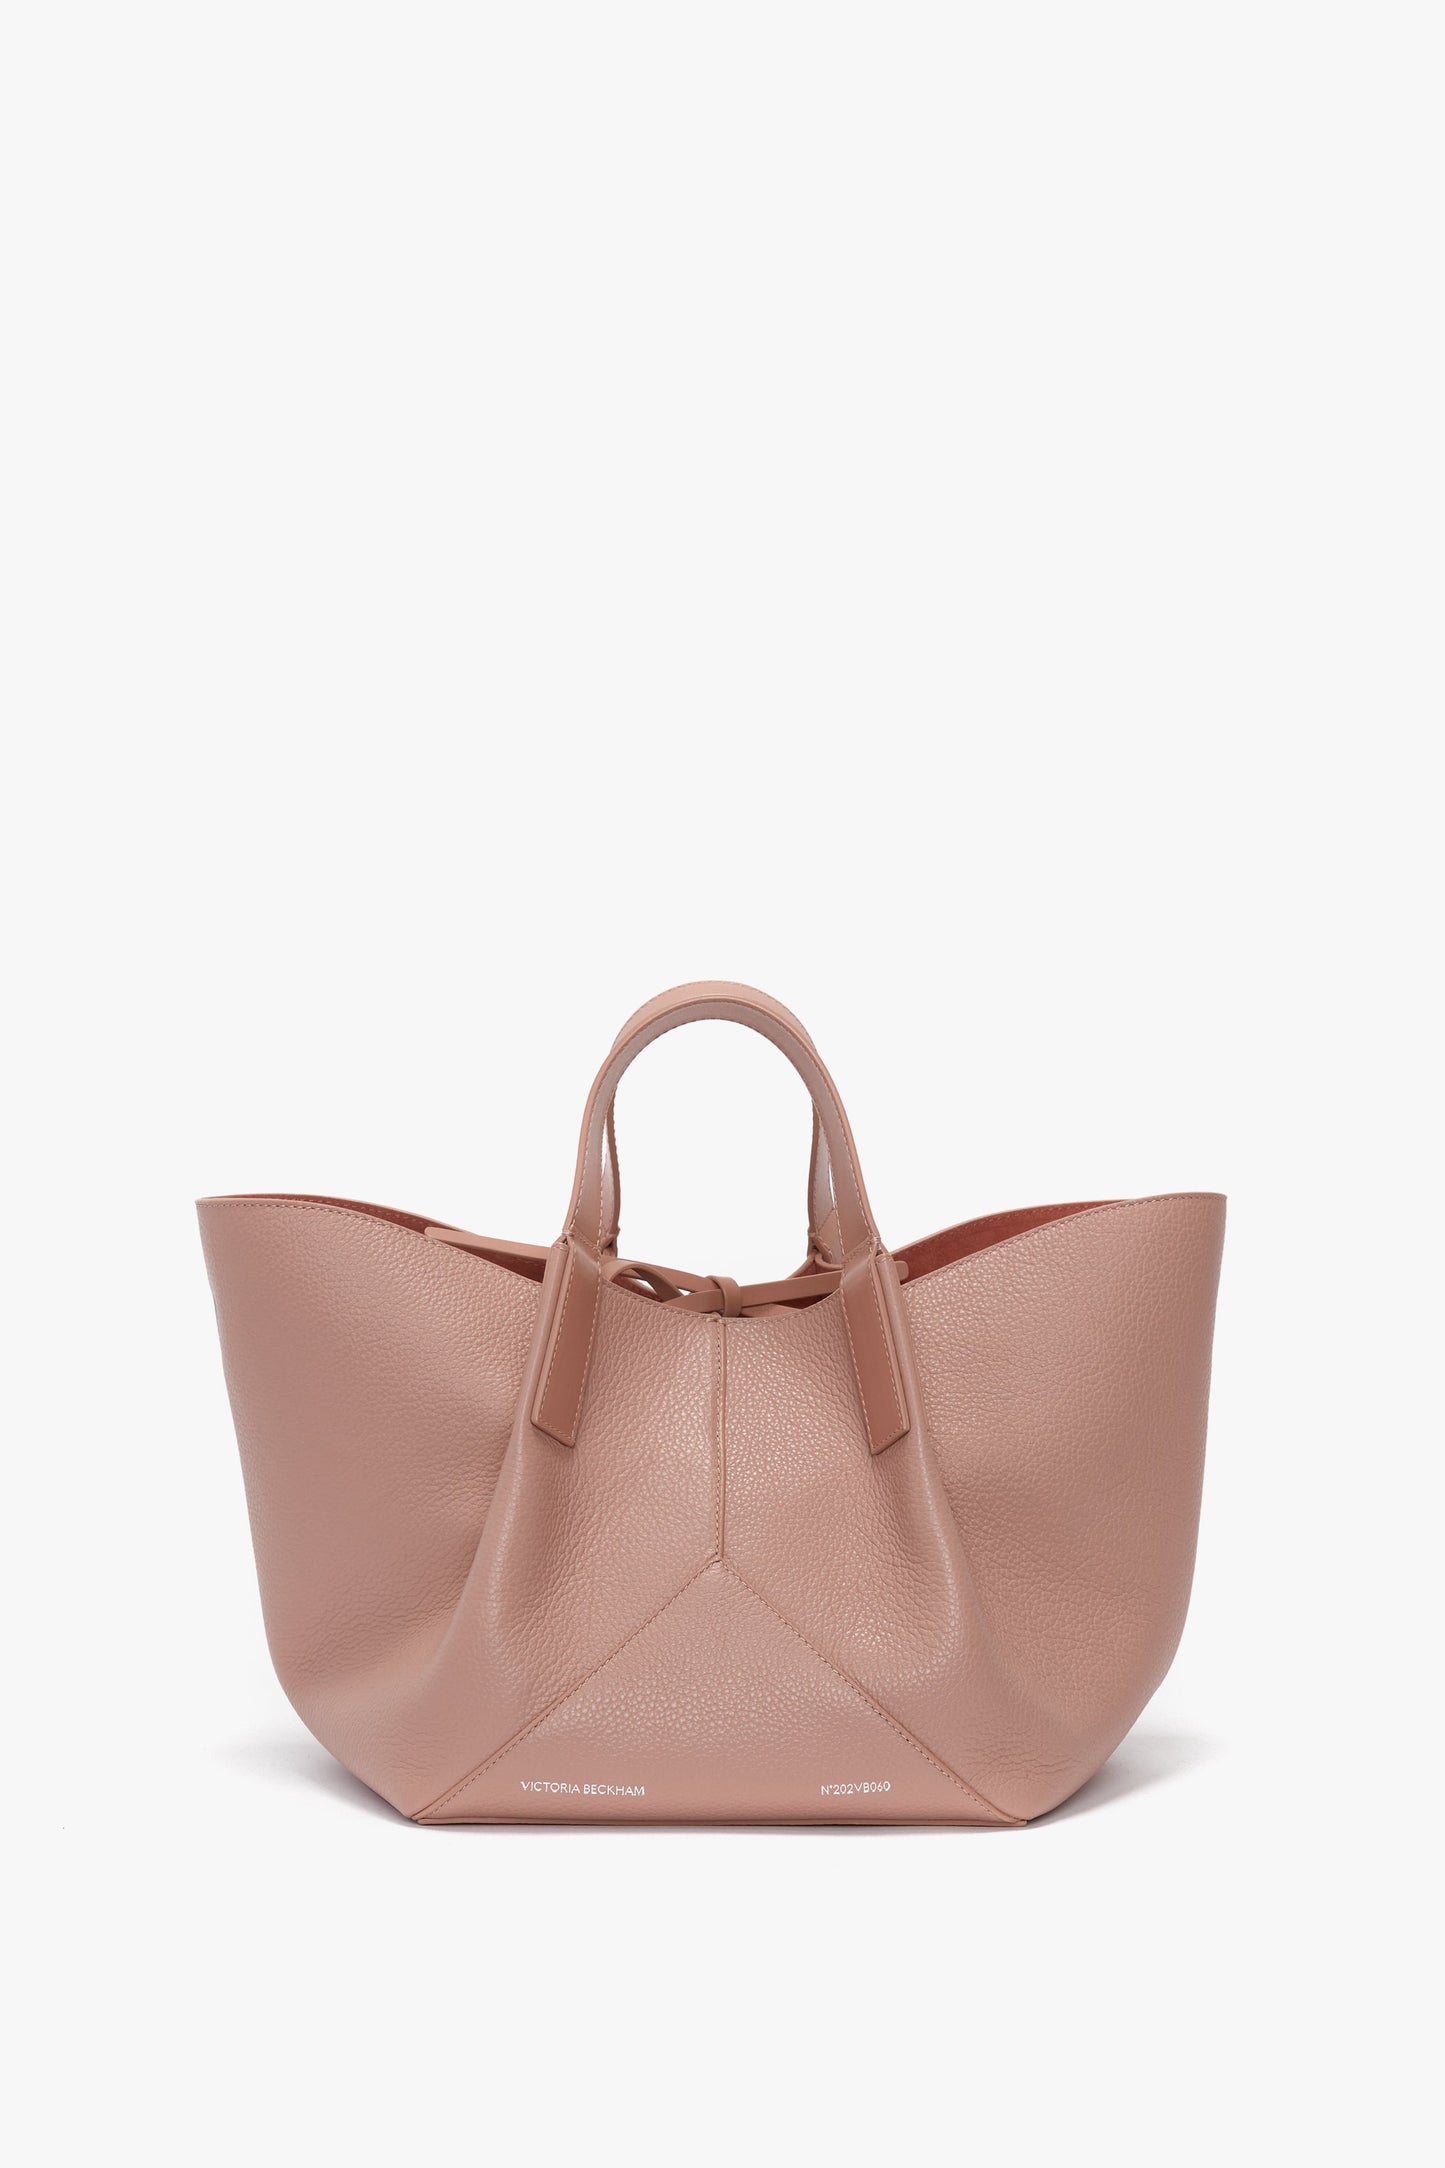 A large, blush-colored calf leather handbag with short handles and a wide base. The W11 Mini Tote Bag In Marshmallow Leather features the brand name "Victoria Beckham" written near the bottom edge.